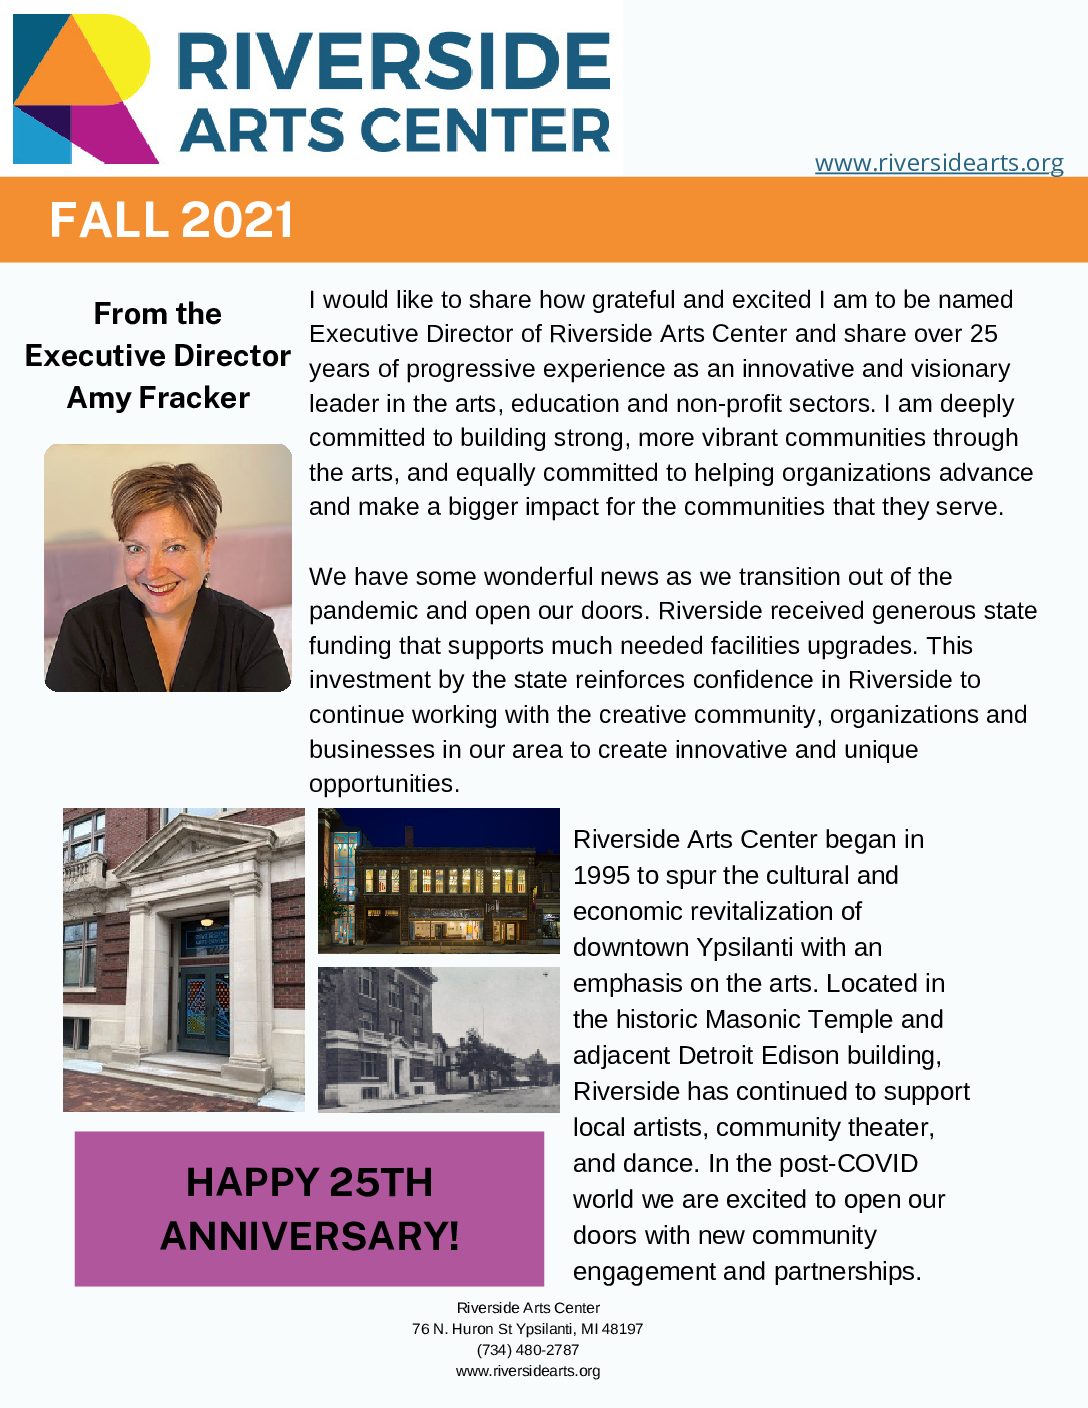 The Fall Newsletter is out!